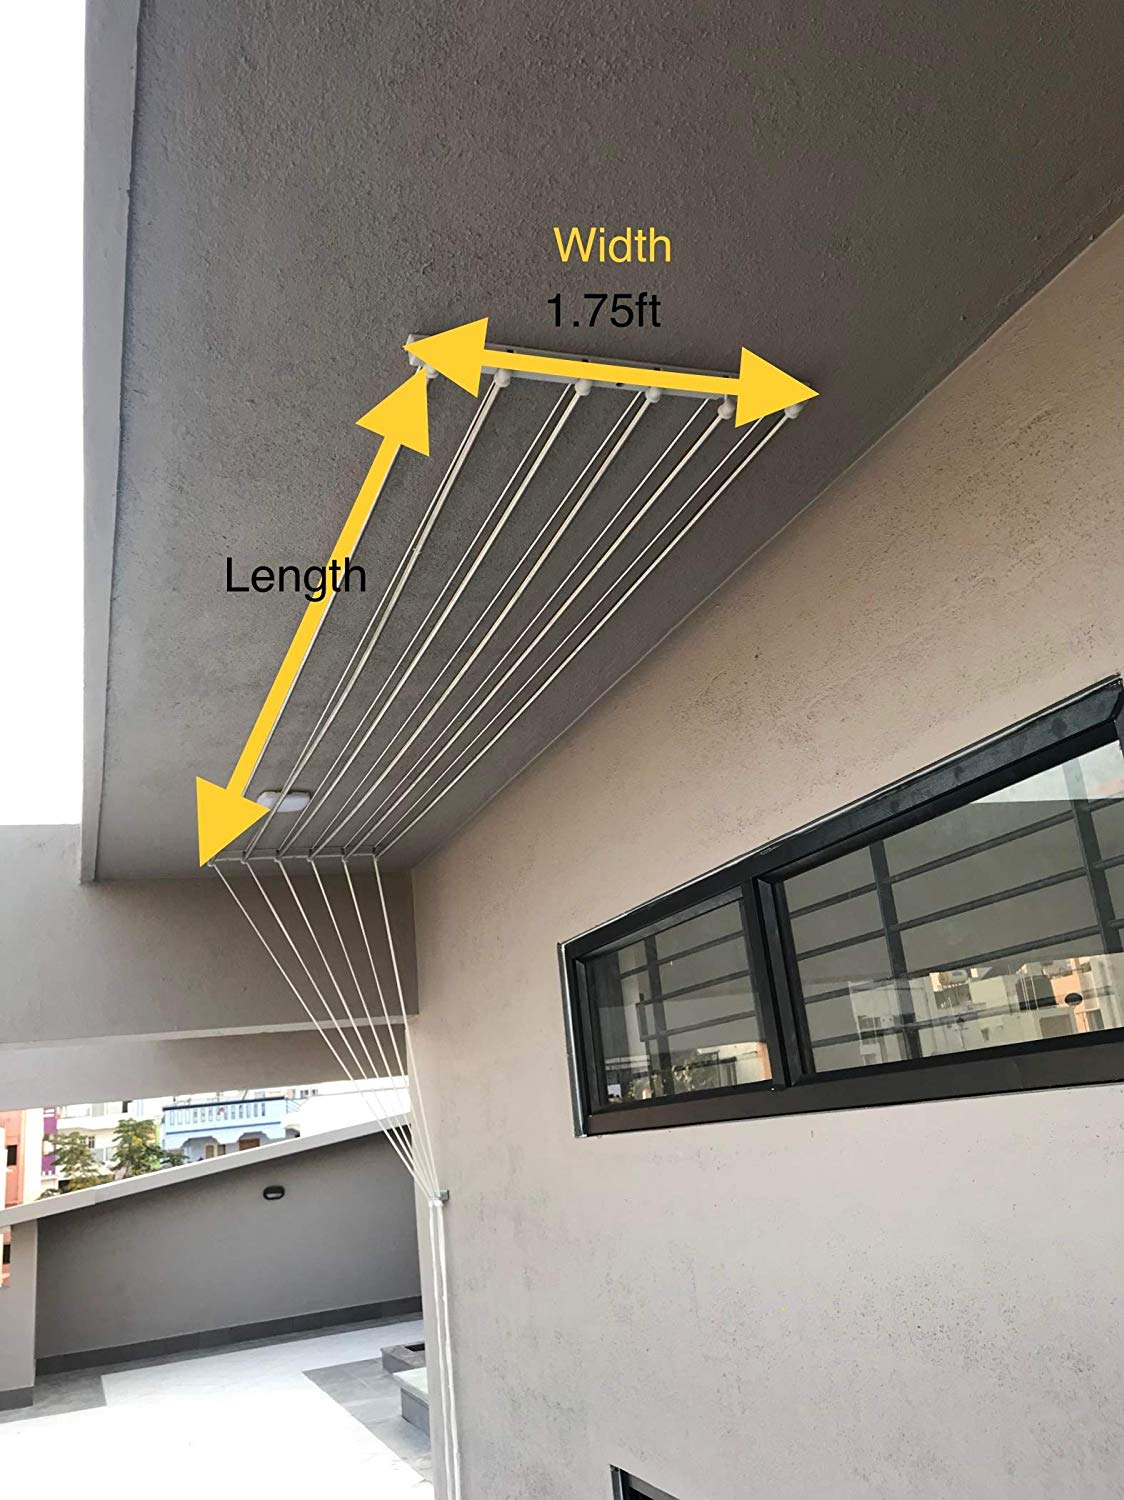 Balcony Cloth Drying Roof Hangers [ 7feet x 6 lines ] Premium Quality, Ever Dry Ceiling Cloth Drying Hangers